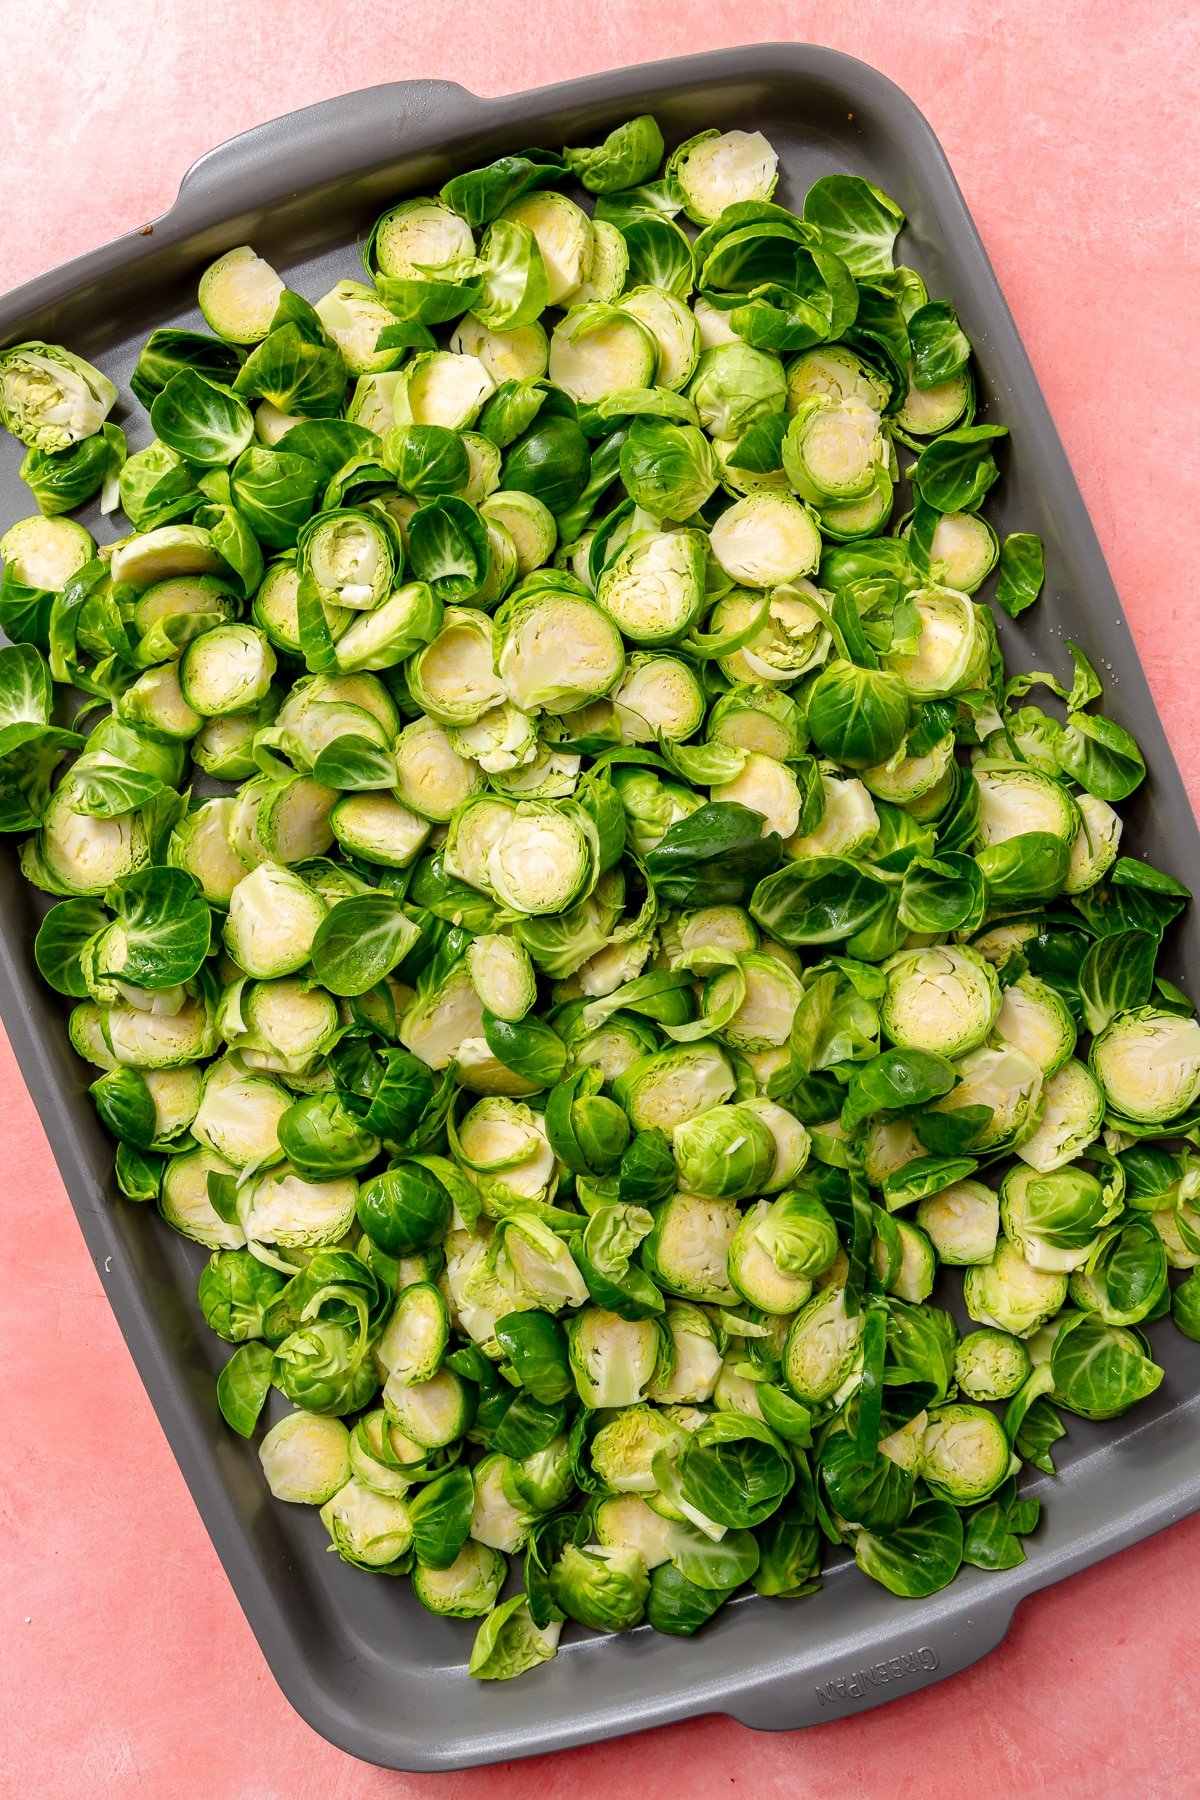 Halved brussels sprouts lay, in an even layer, on a grey baking tray.